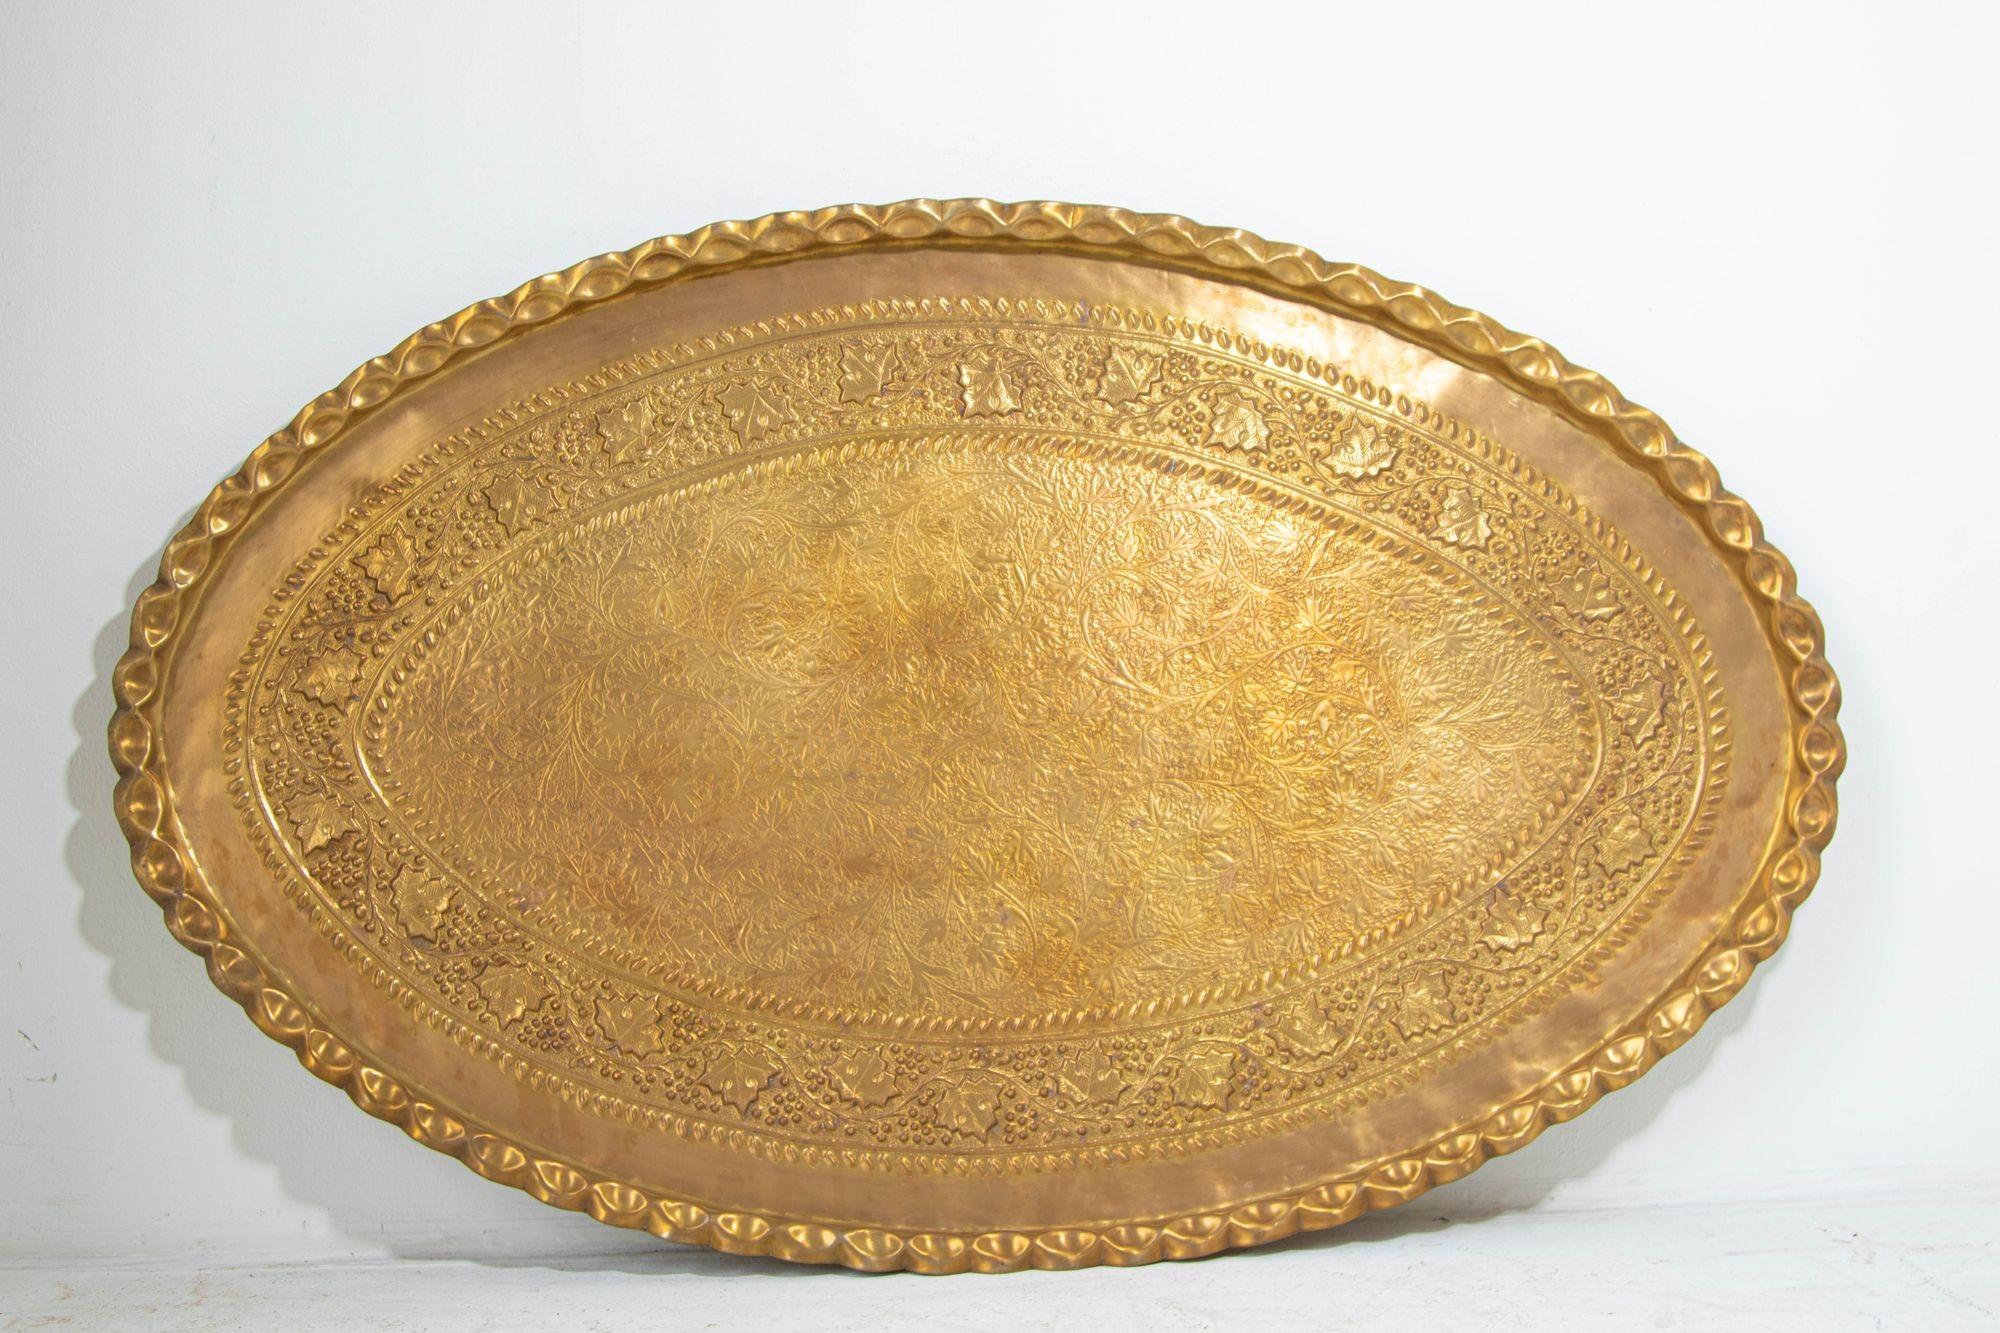 Large Massive Mid-Century Brass Moroccan Oval Brass Tray.
Hand tooled etched very large Moroccan polished brass tray.
This oval brass tray is the largest we've ever seen, measuring 53-1/2